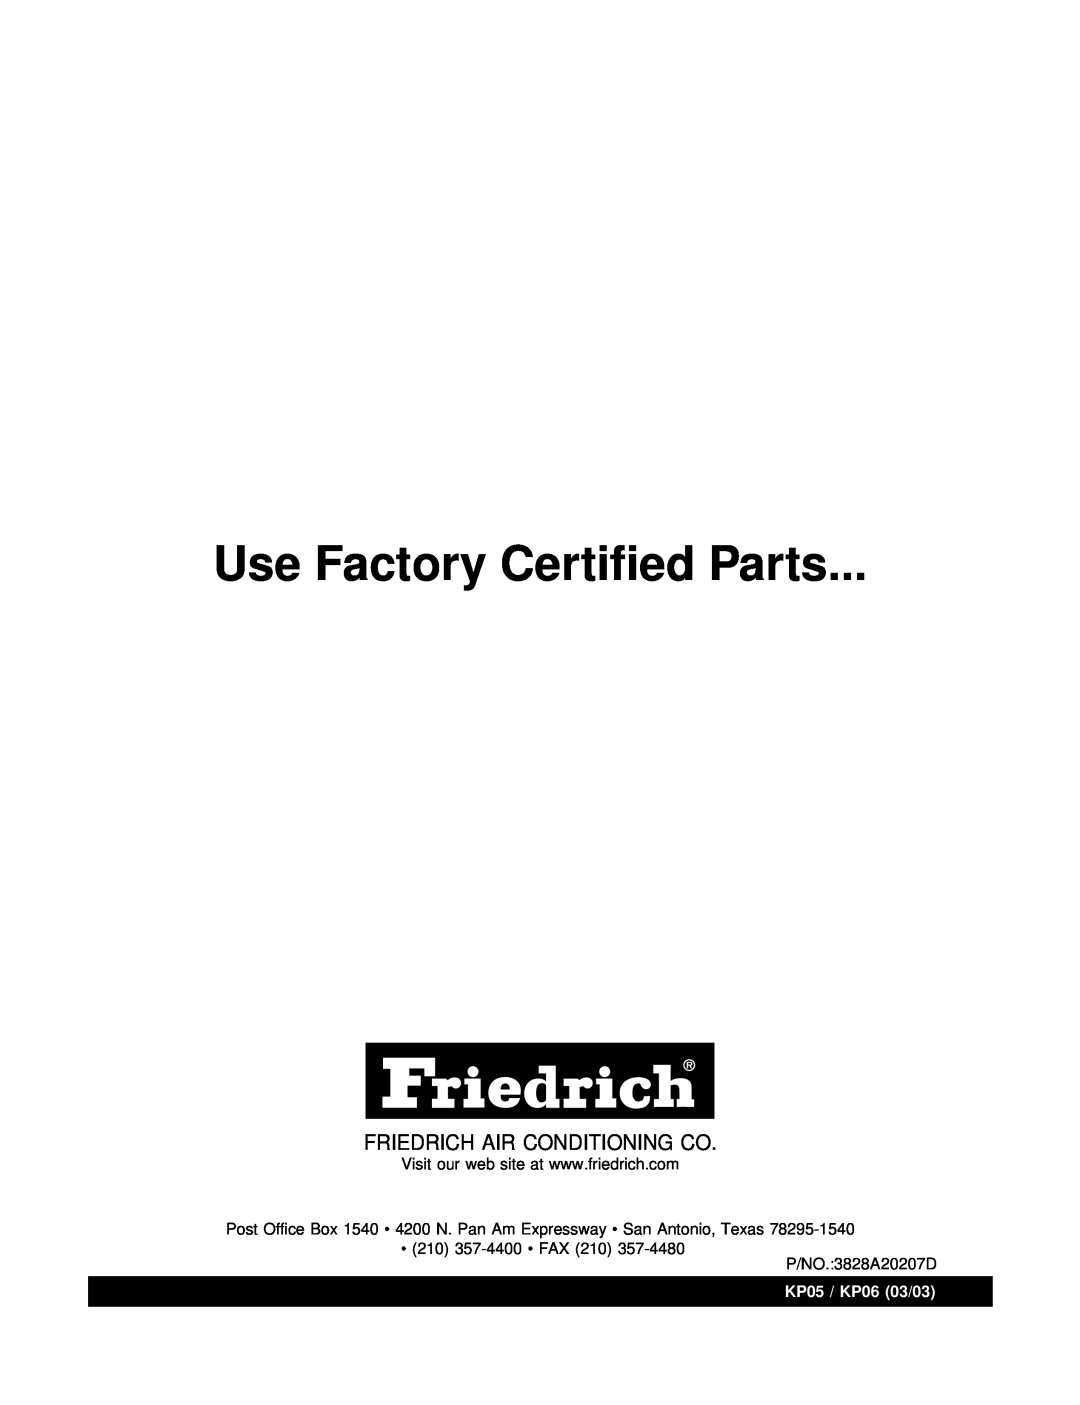 Friedrich KP05A10 KP06A10 manual Use Factory Certified Parts, Friedrich Air Conditioning Co, KP05 / KP06 03/03 